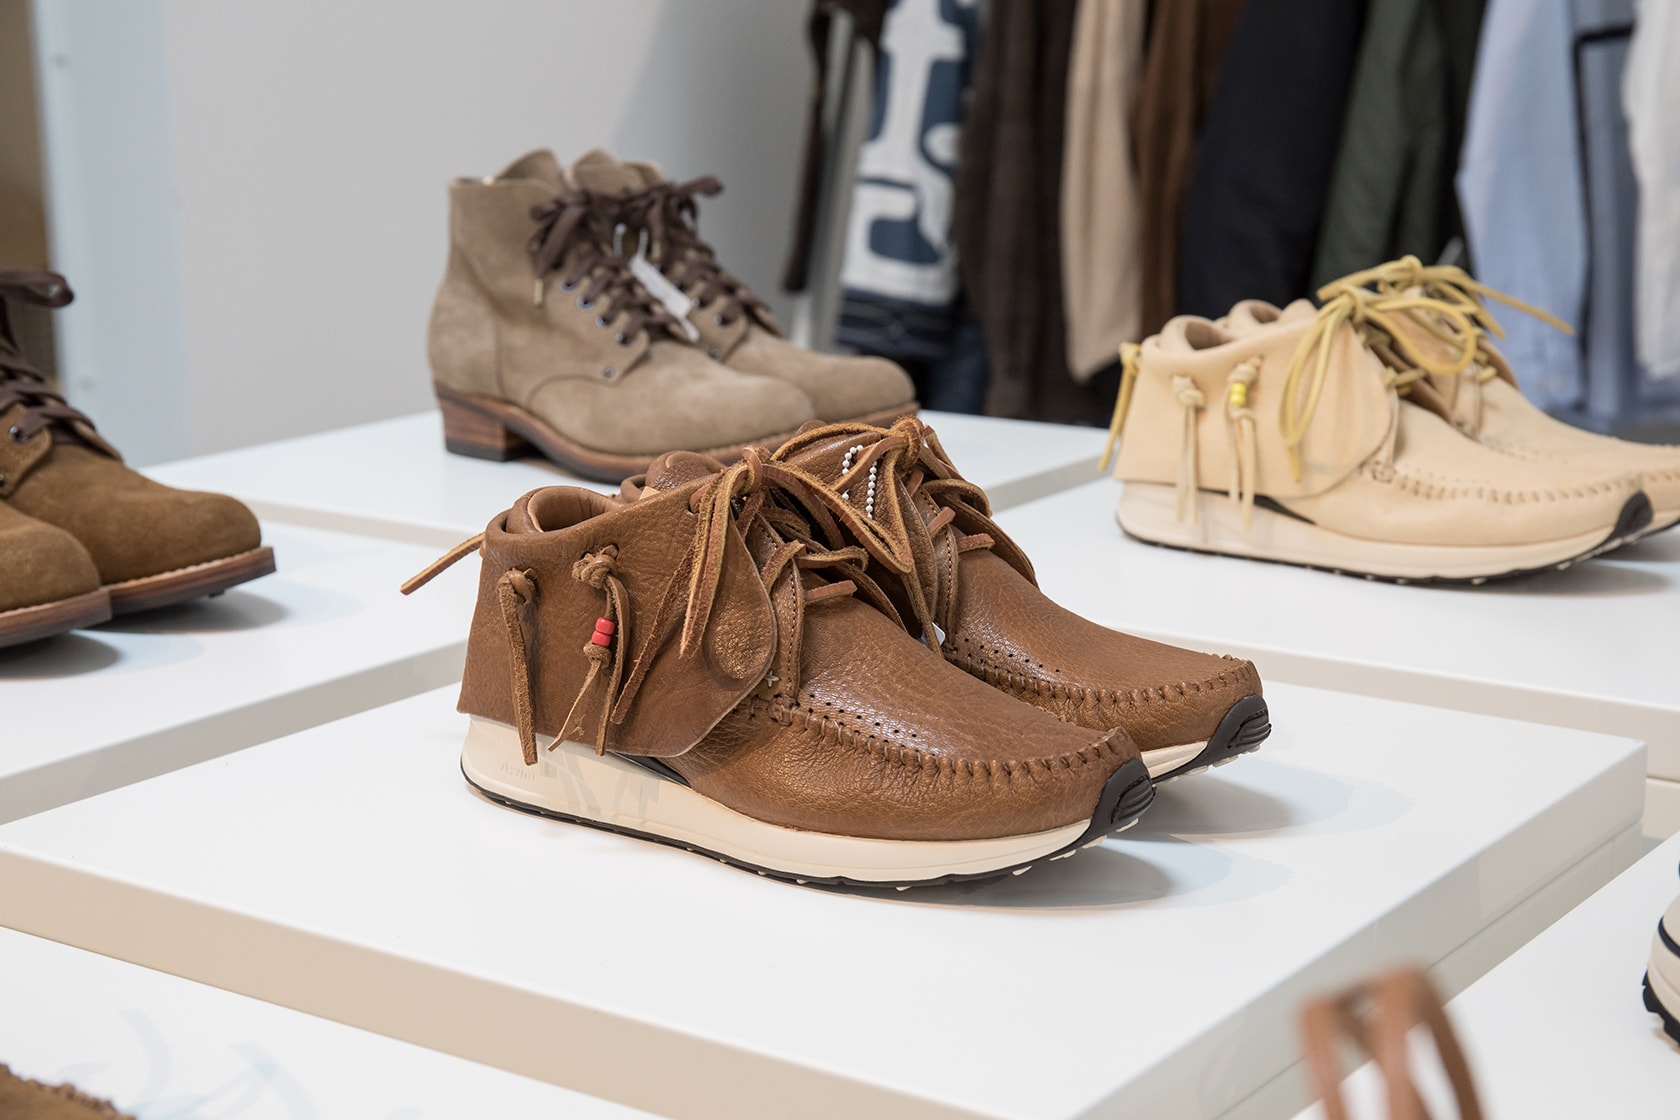 WMV visvim Brentwood Pop-Up Store Open Now Shop Clothing Accessories Tote Bags Shoes Trainers Kicks Sneakers